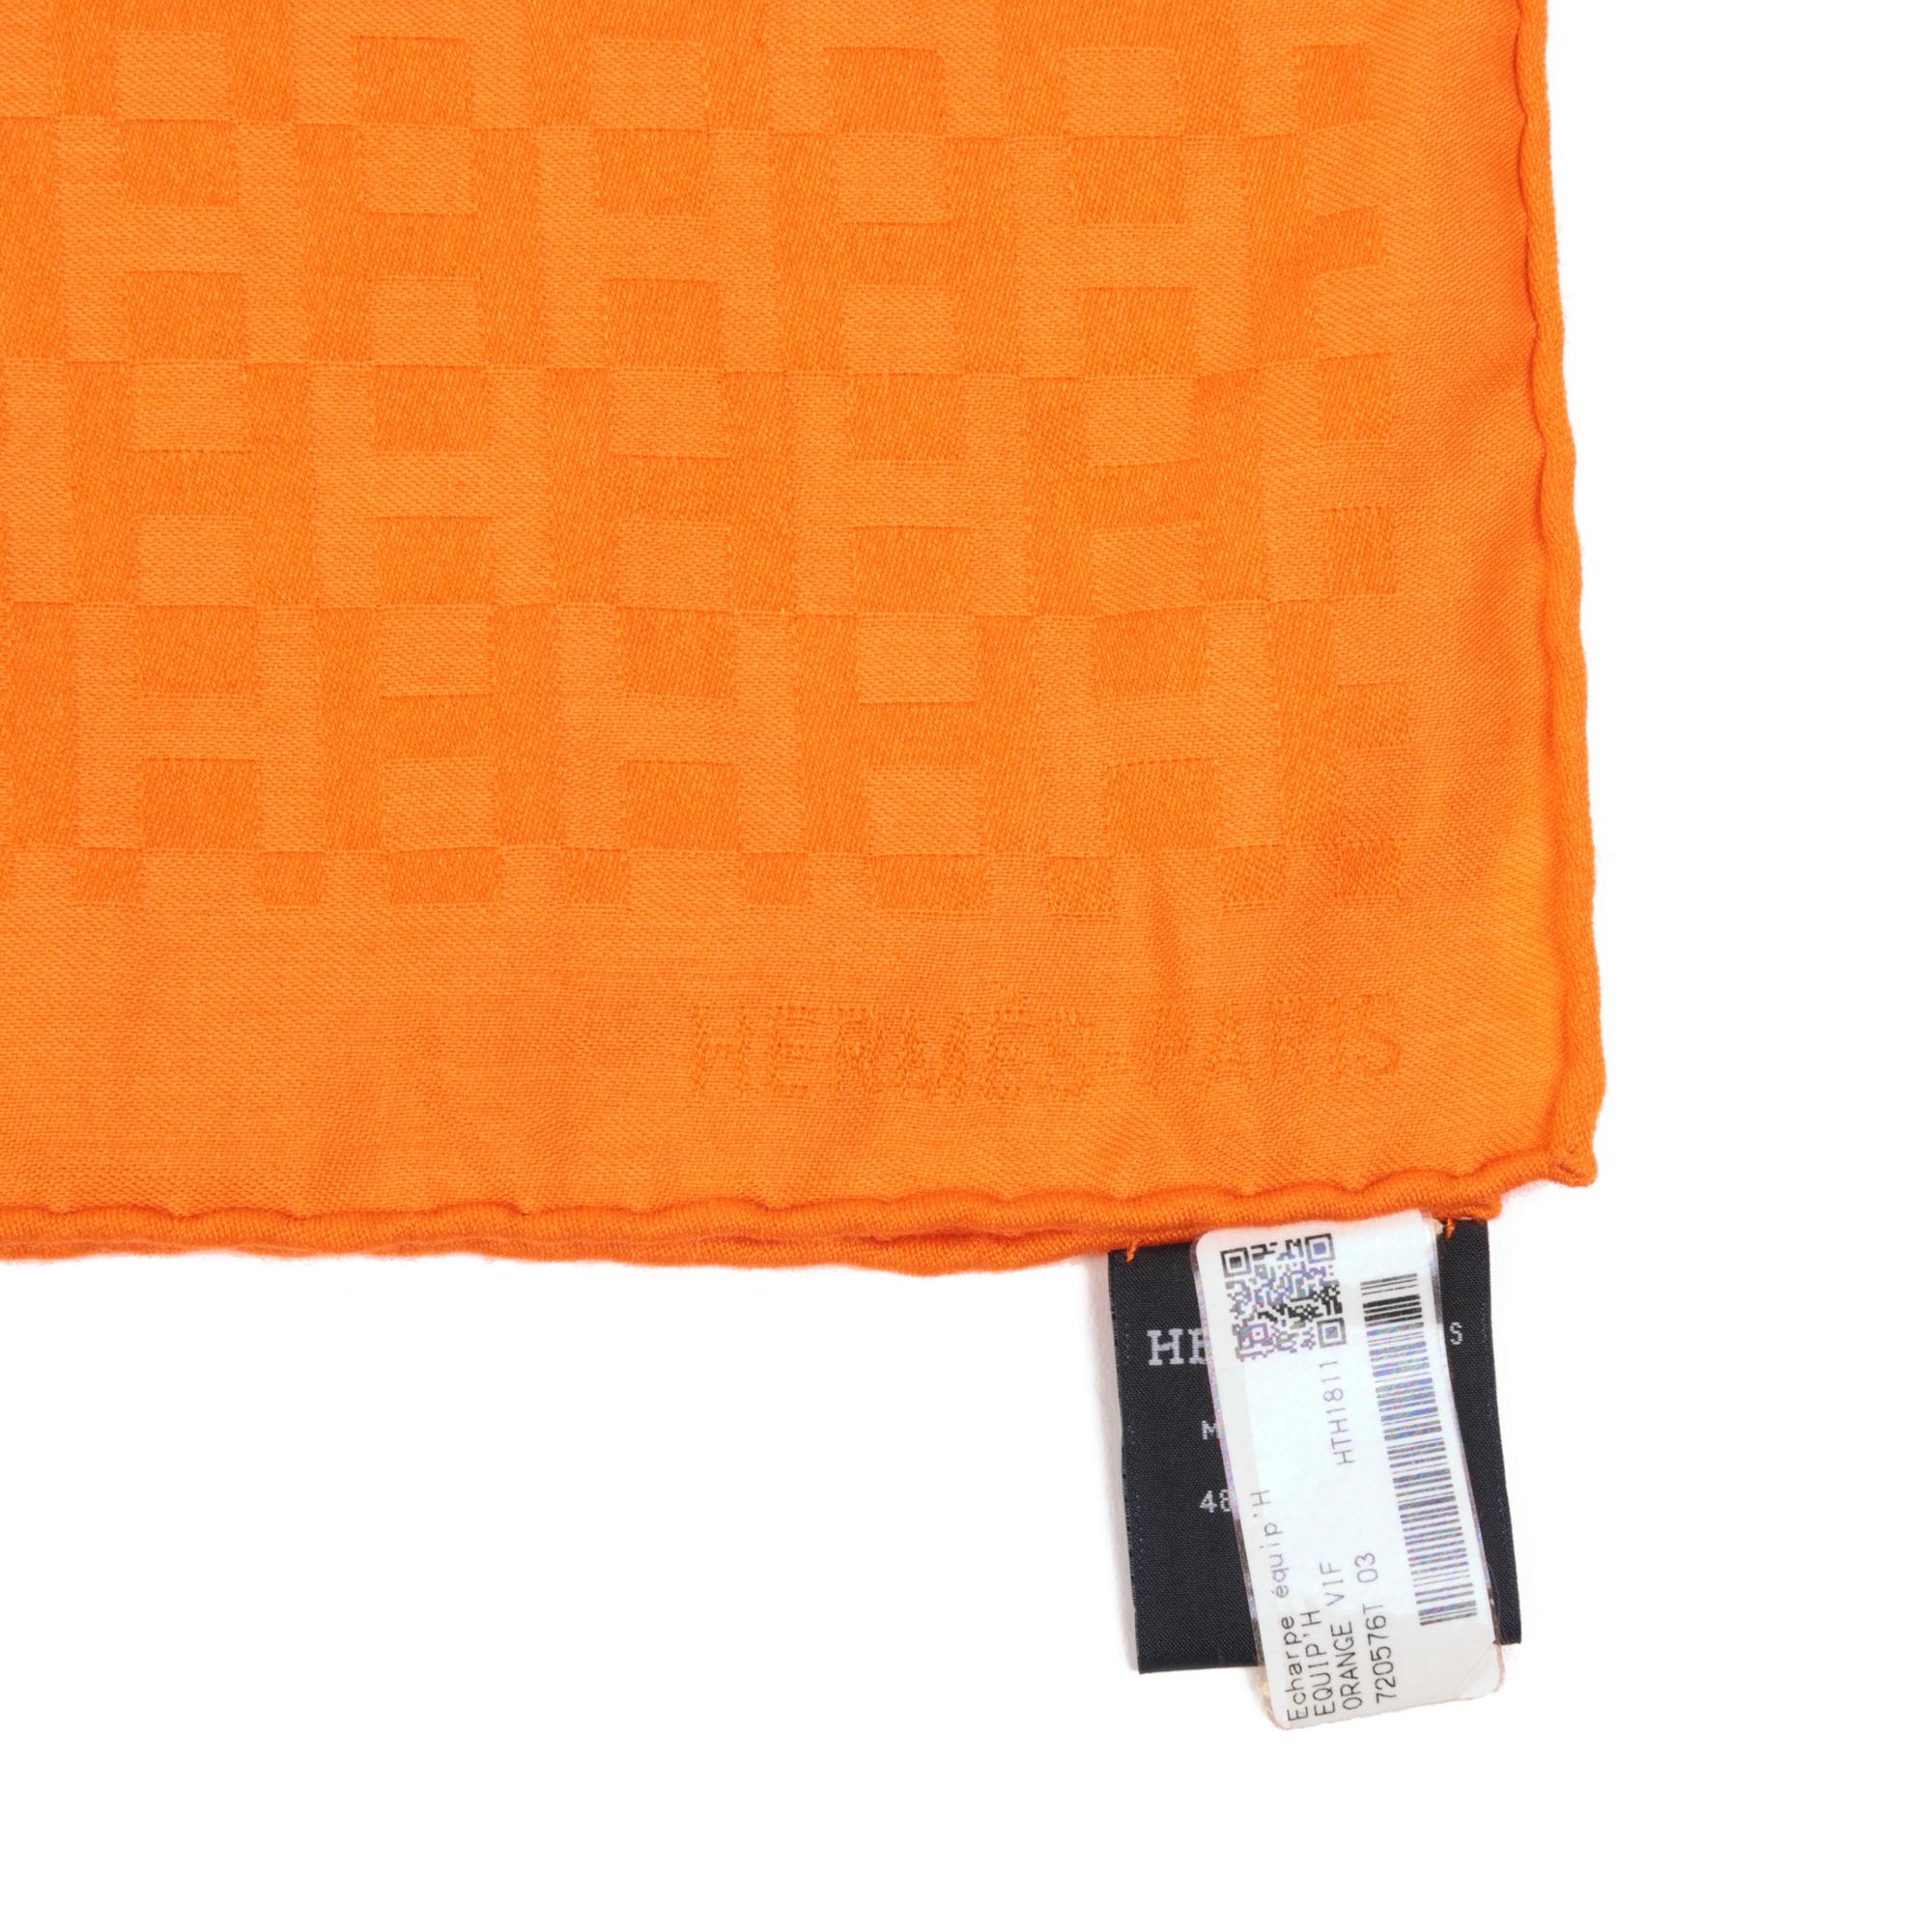 Hermès Orange H Cashmere, Wool & Silk Equip'H 180 Scarf

Condition Details:
This item is in unworn condition.

XUPES REFERENCE	AA0166
BRAND	Hermès
MODEL	Scarf
AGE	2022
GENDER	Women's
MATERIAL(S)	Cashmere
COLOUR	Orange
BRAND COLOUR	Orange